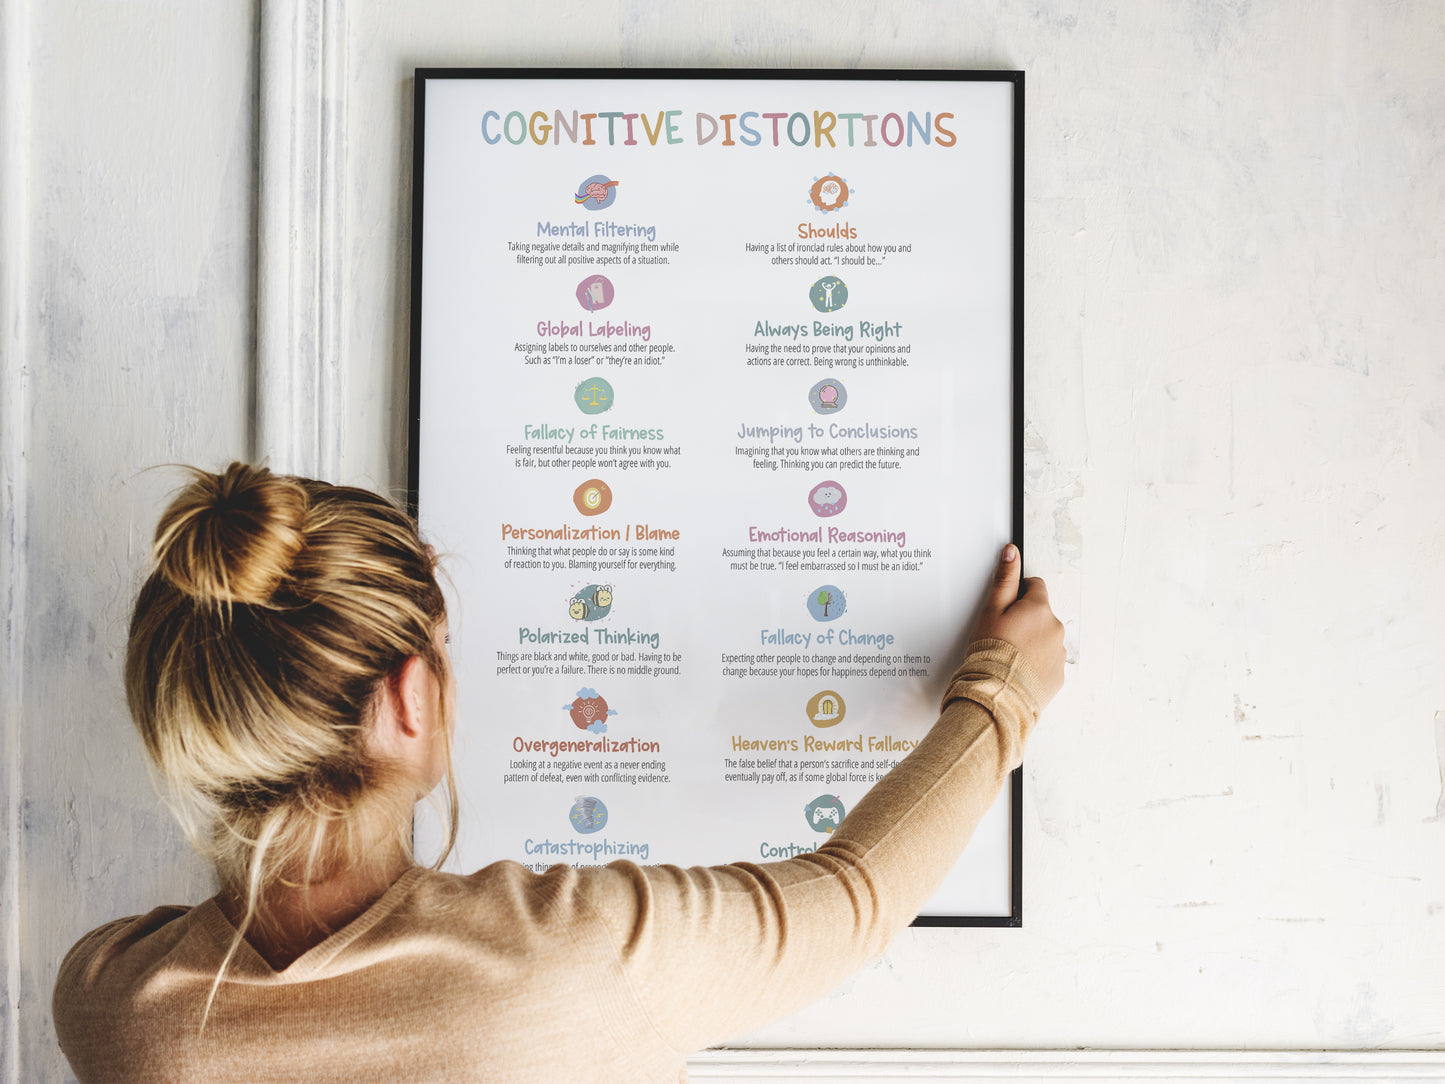 Cognitive Distortions Poster